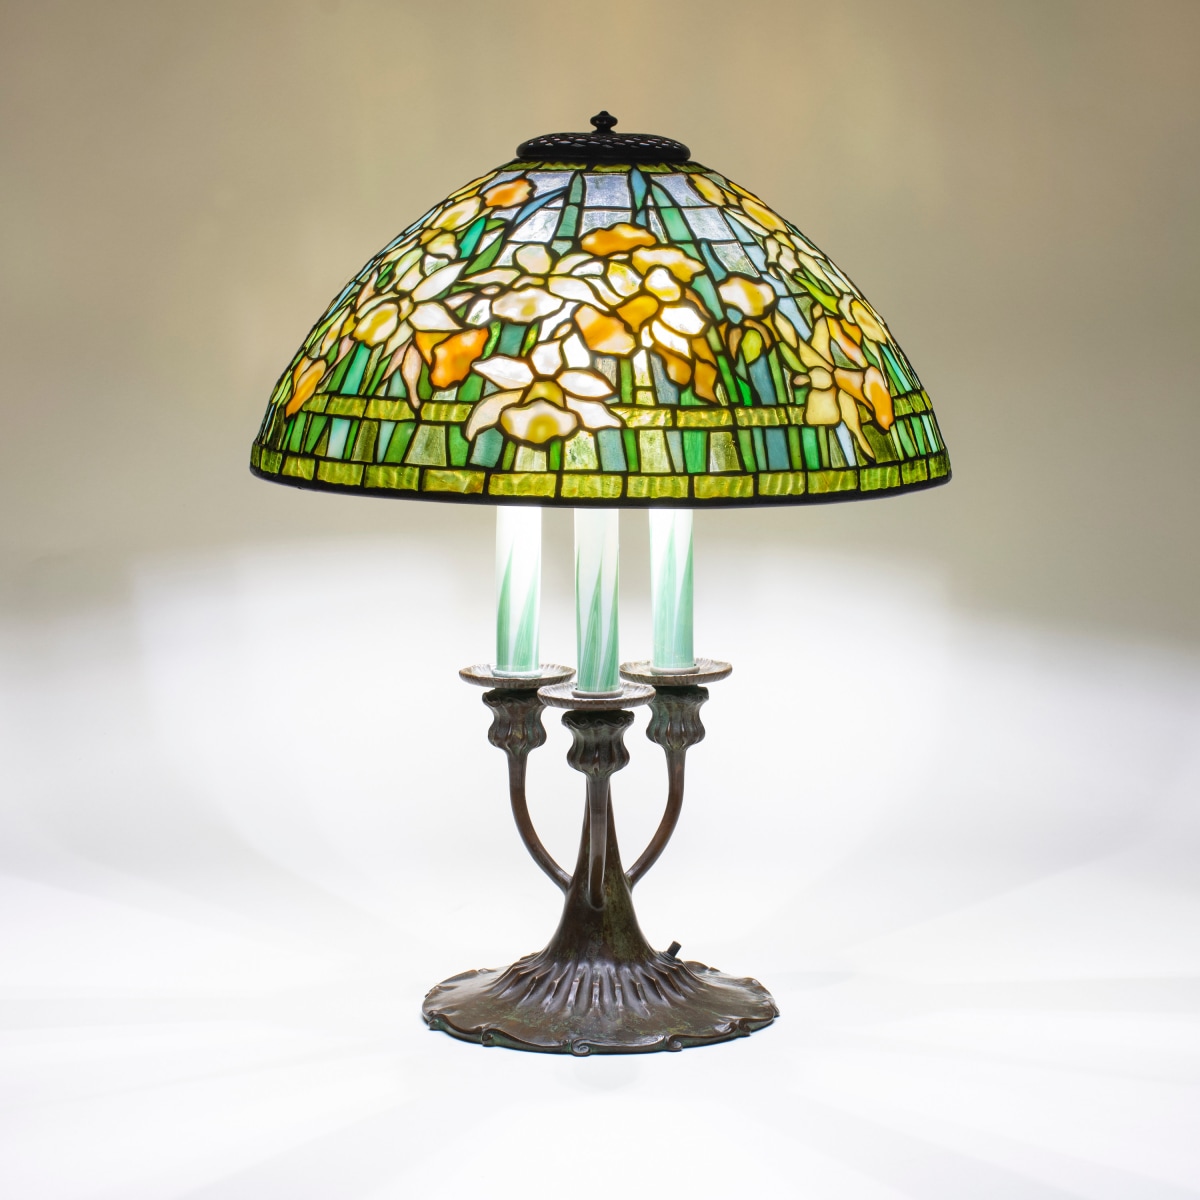 a leaded glass tiffany lamp depicting sunny mottled yellow daffodil flowers with spiky leaves in shades of green to greenish blue against a transparent glass sky